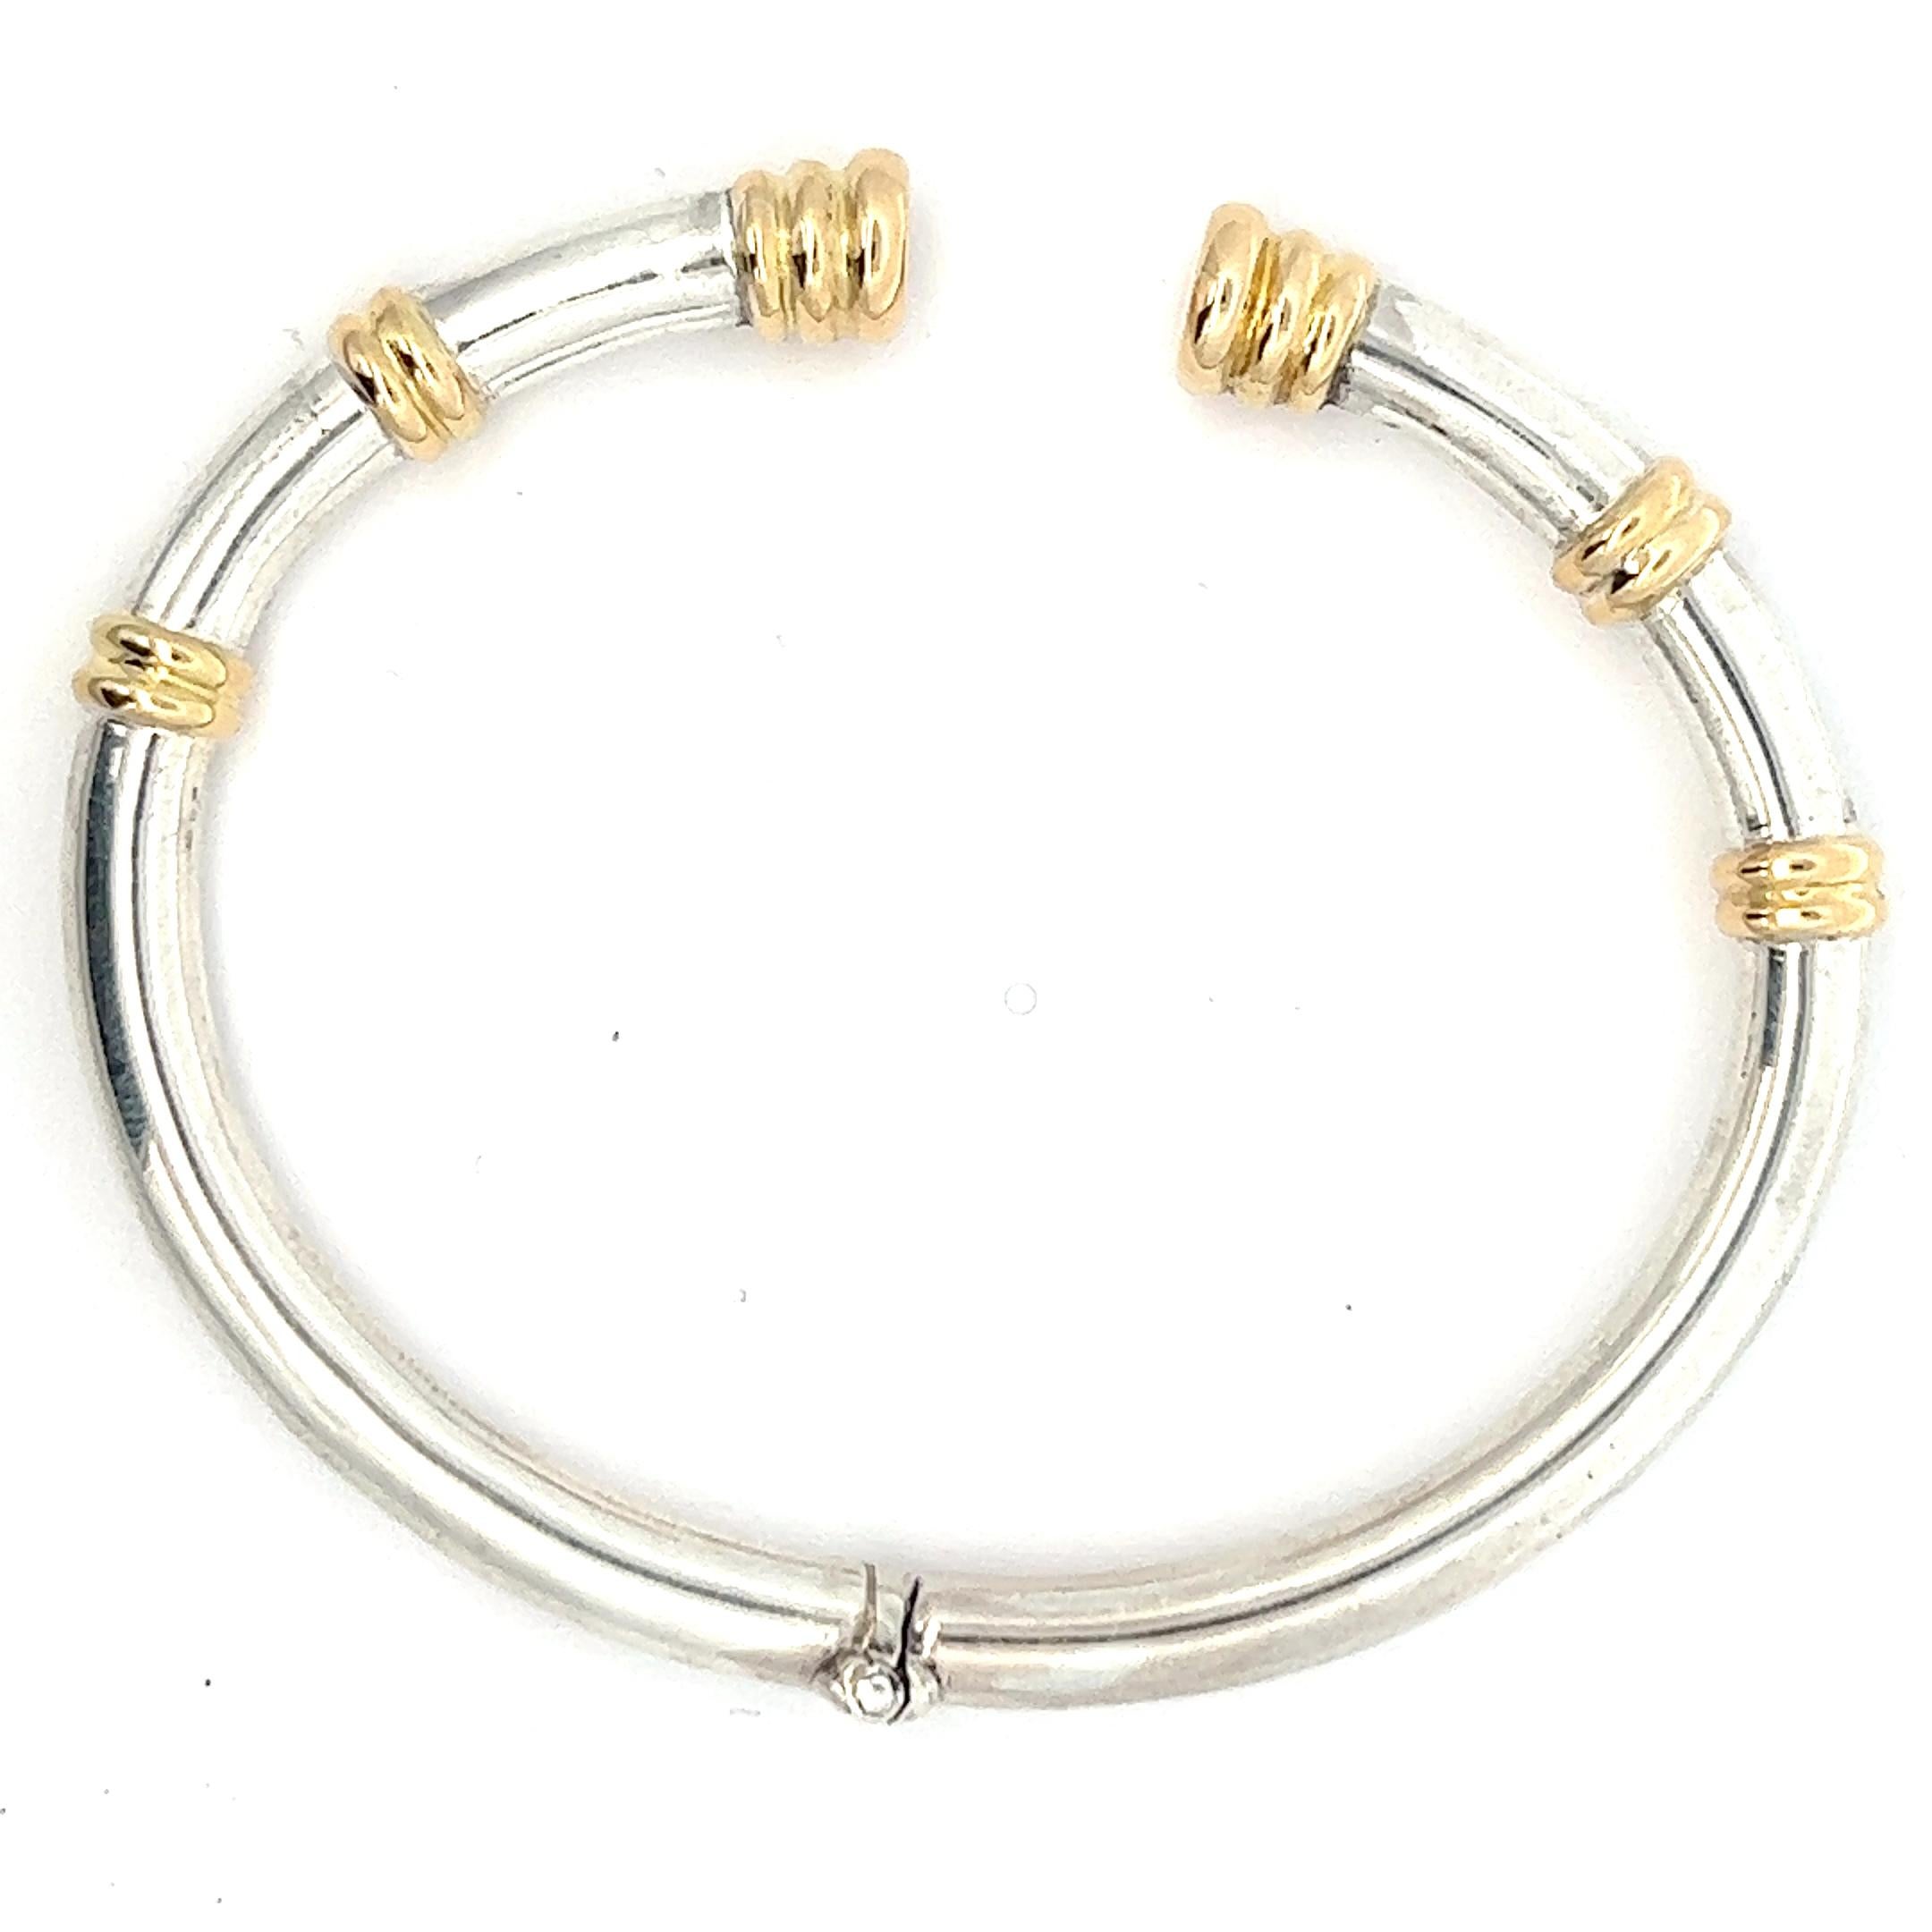 A 925/sterling silver and 18k yellow gold bangle by Lalaounis.
The bangle has an inner diameter of circa 7 cm. 
The bangle is marked with the makers mark for Lalaounis. The bangle is stamped with 750, 925, A21, Greece and Mecan.

This bracelet is